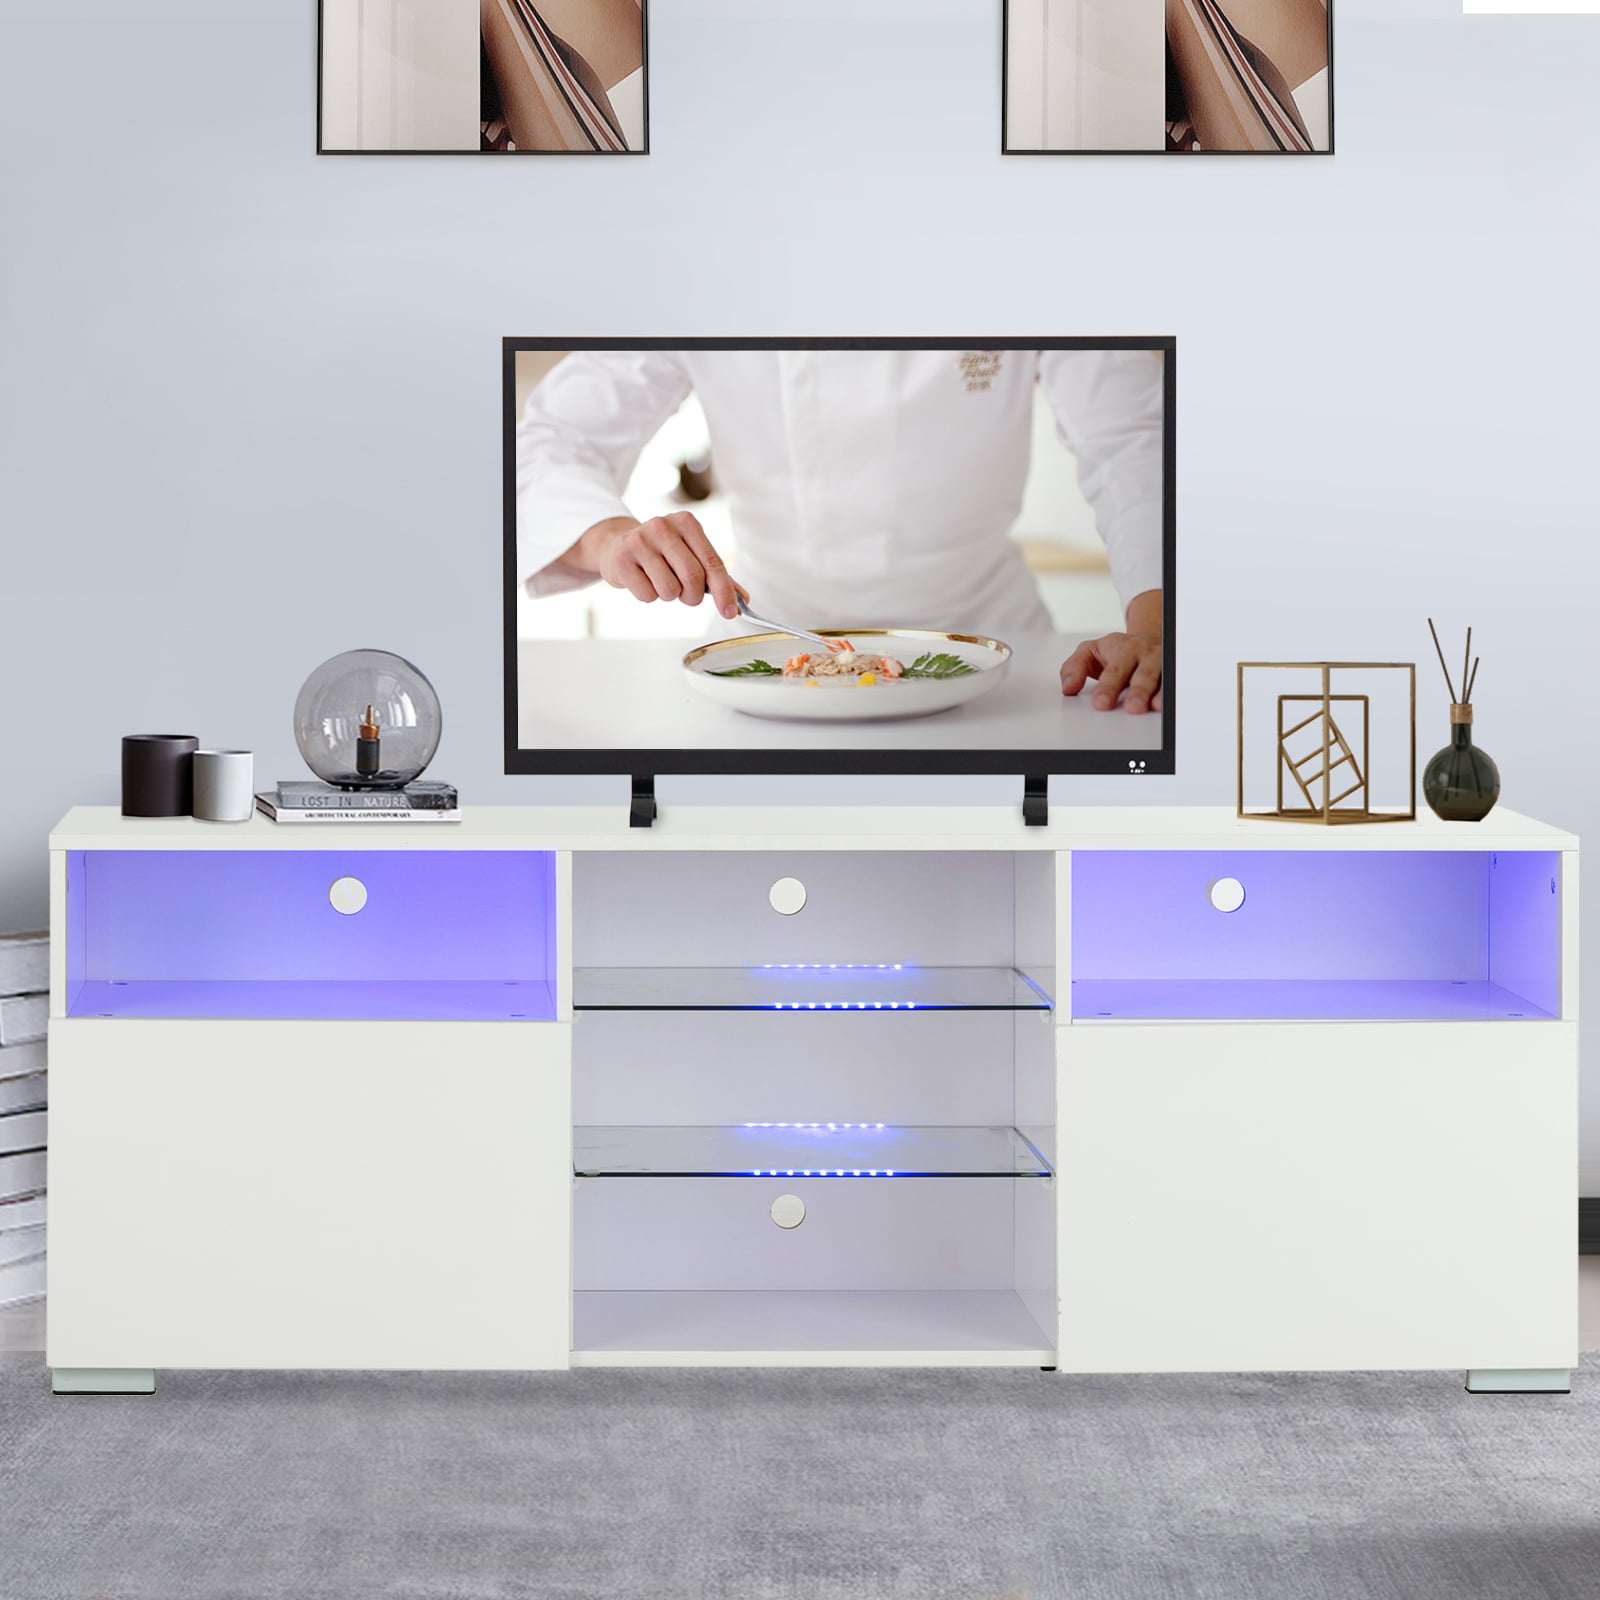 Details about   58" High Gloss TV Stand Unit Cabinet with LED Light 2 Doors Console RC White 